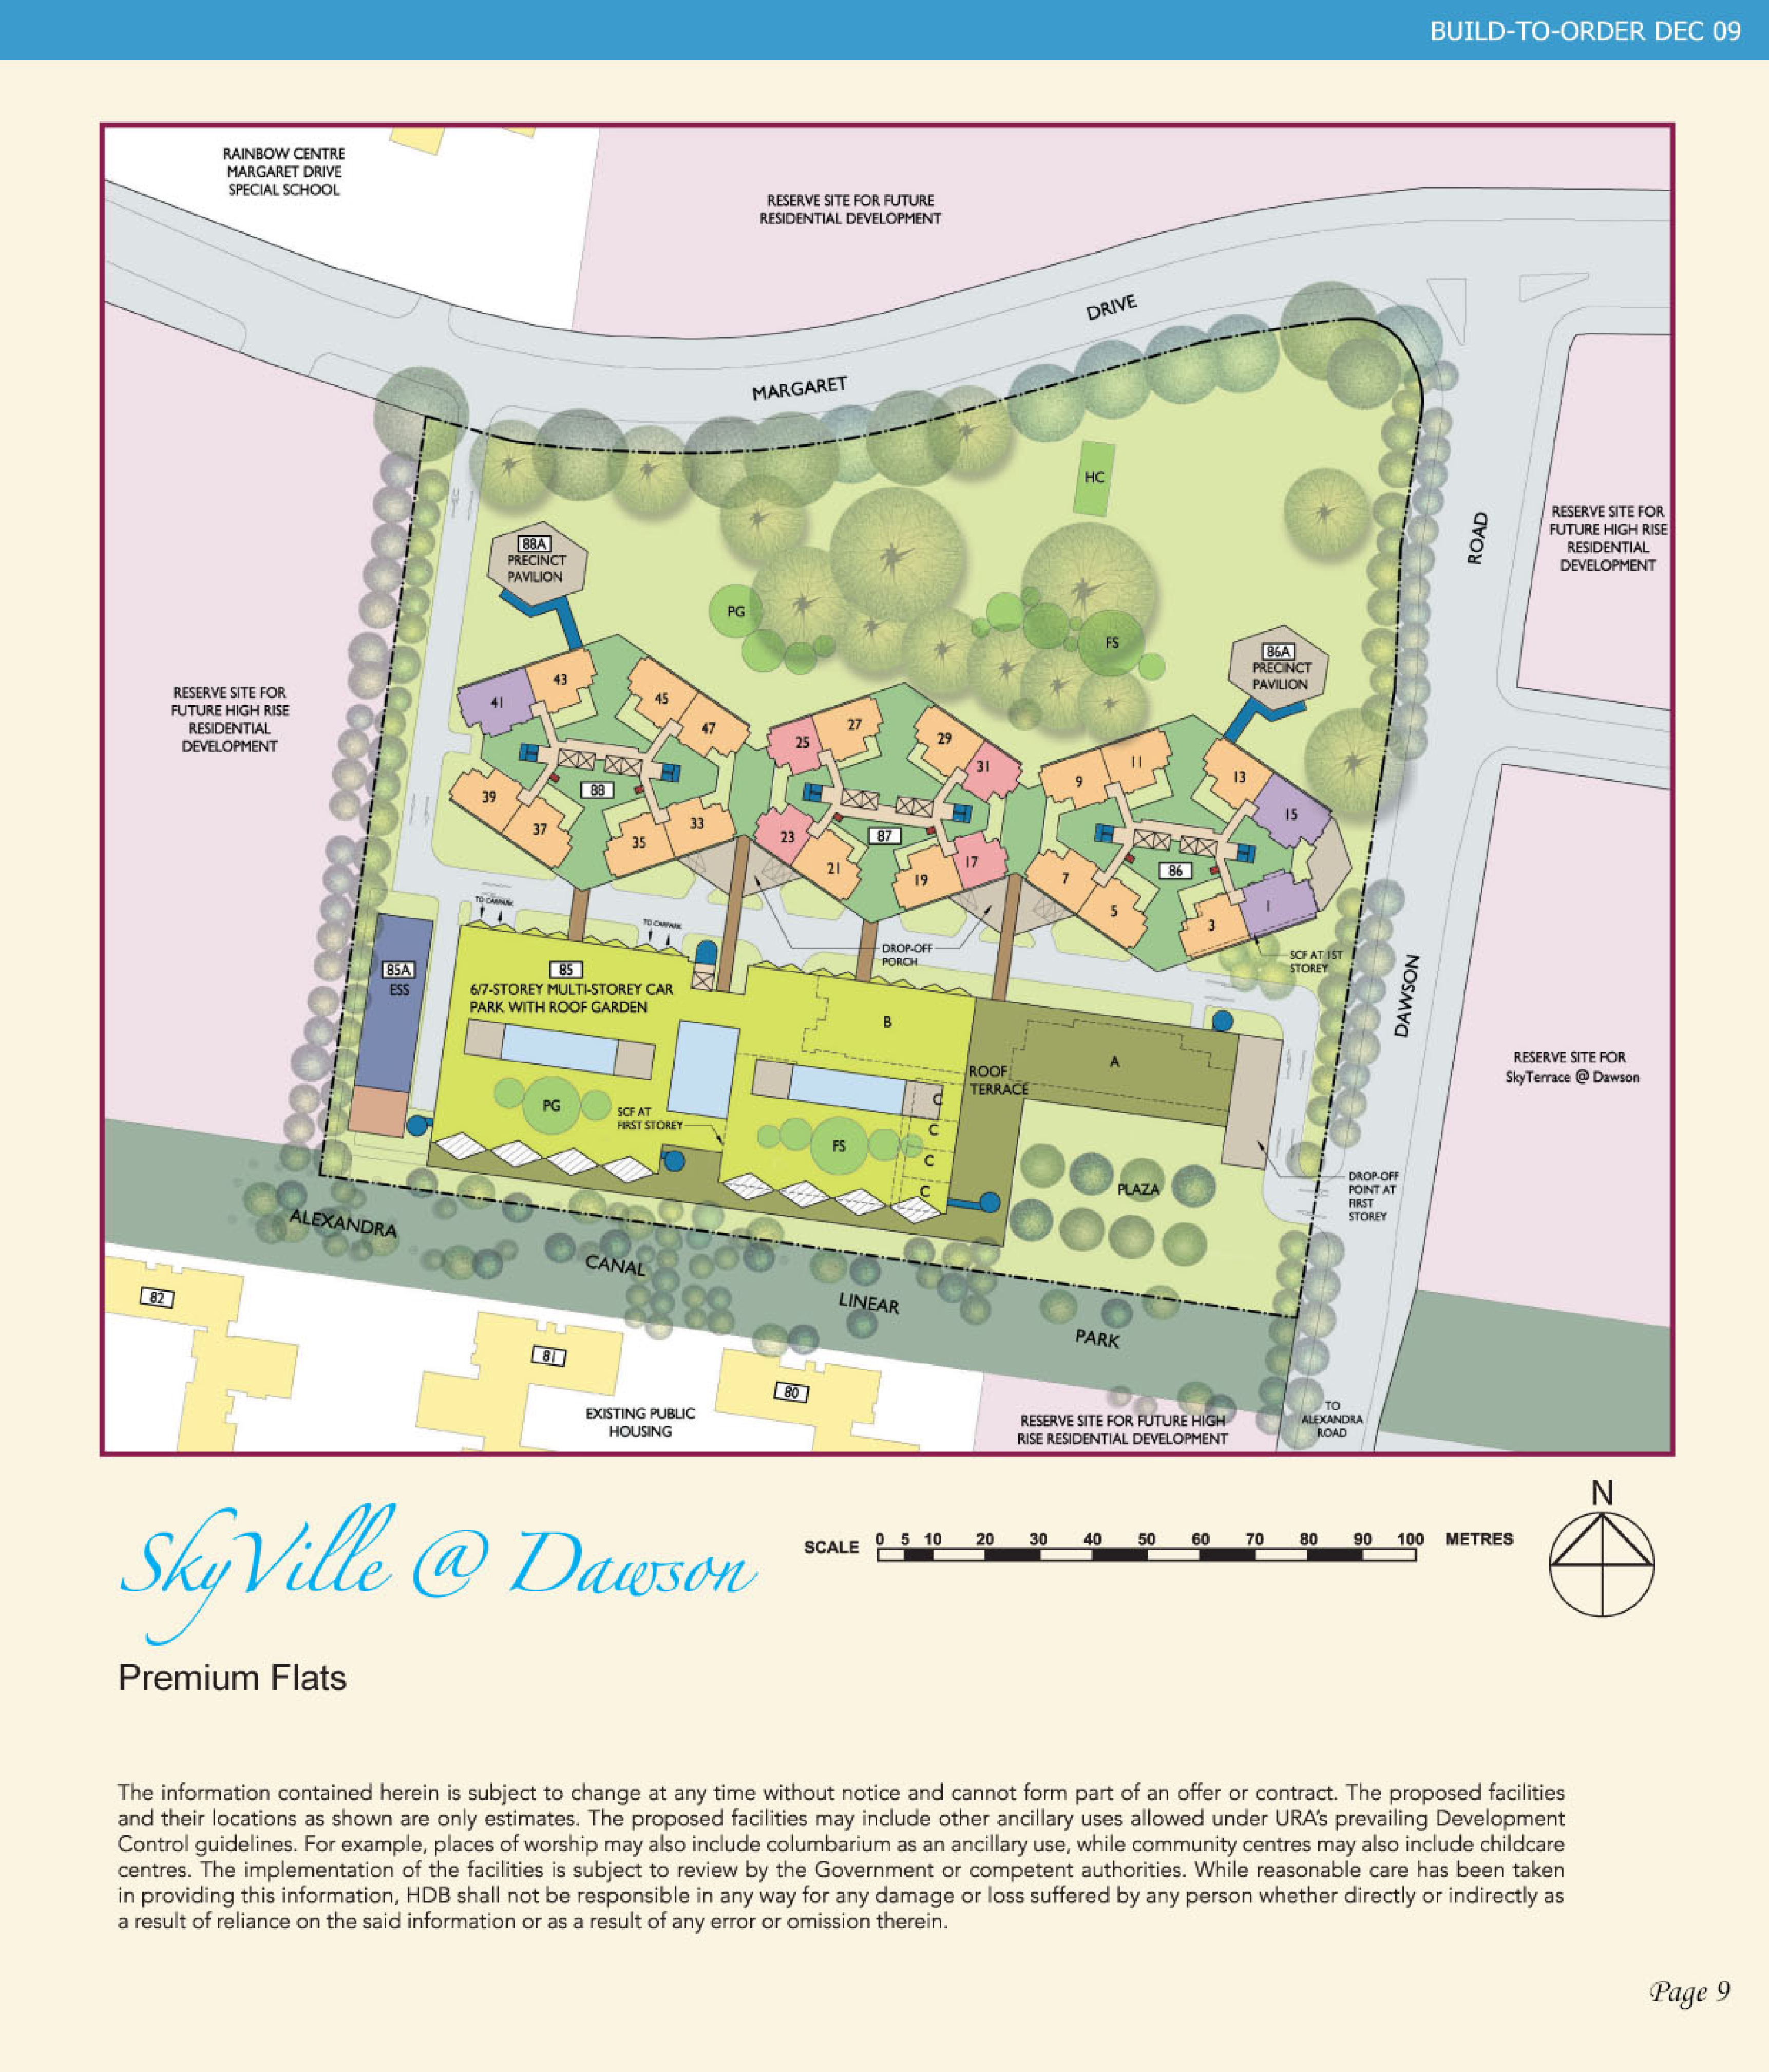 HDB SkyVille at Dawson BTO launched in December 2009 site